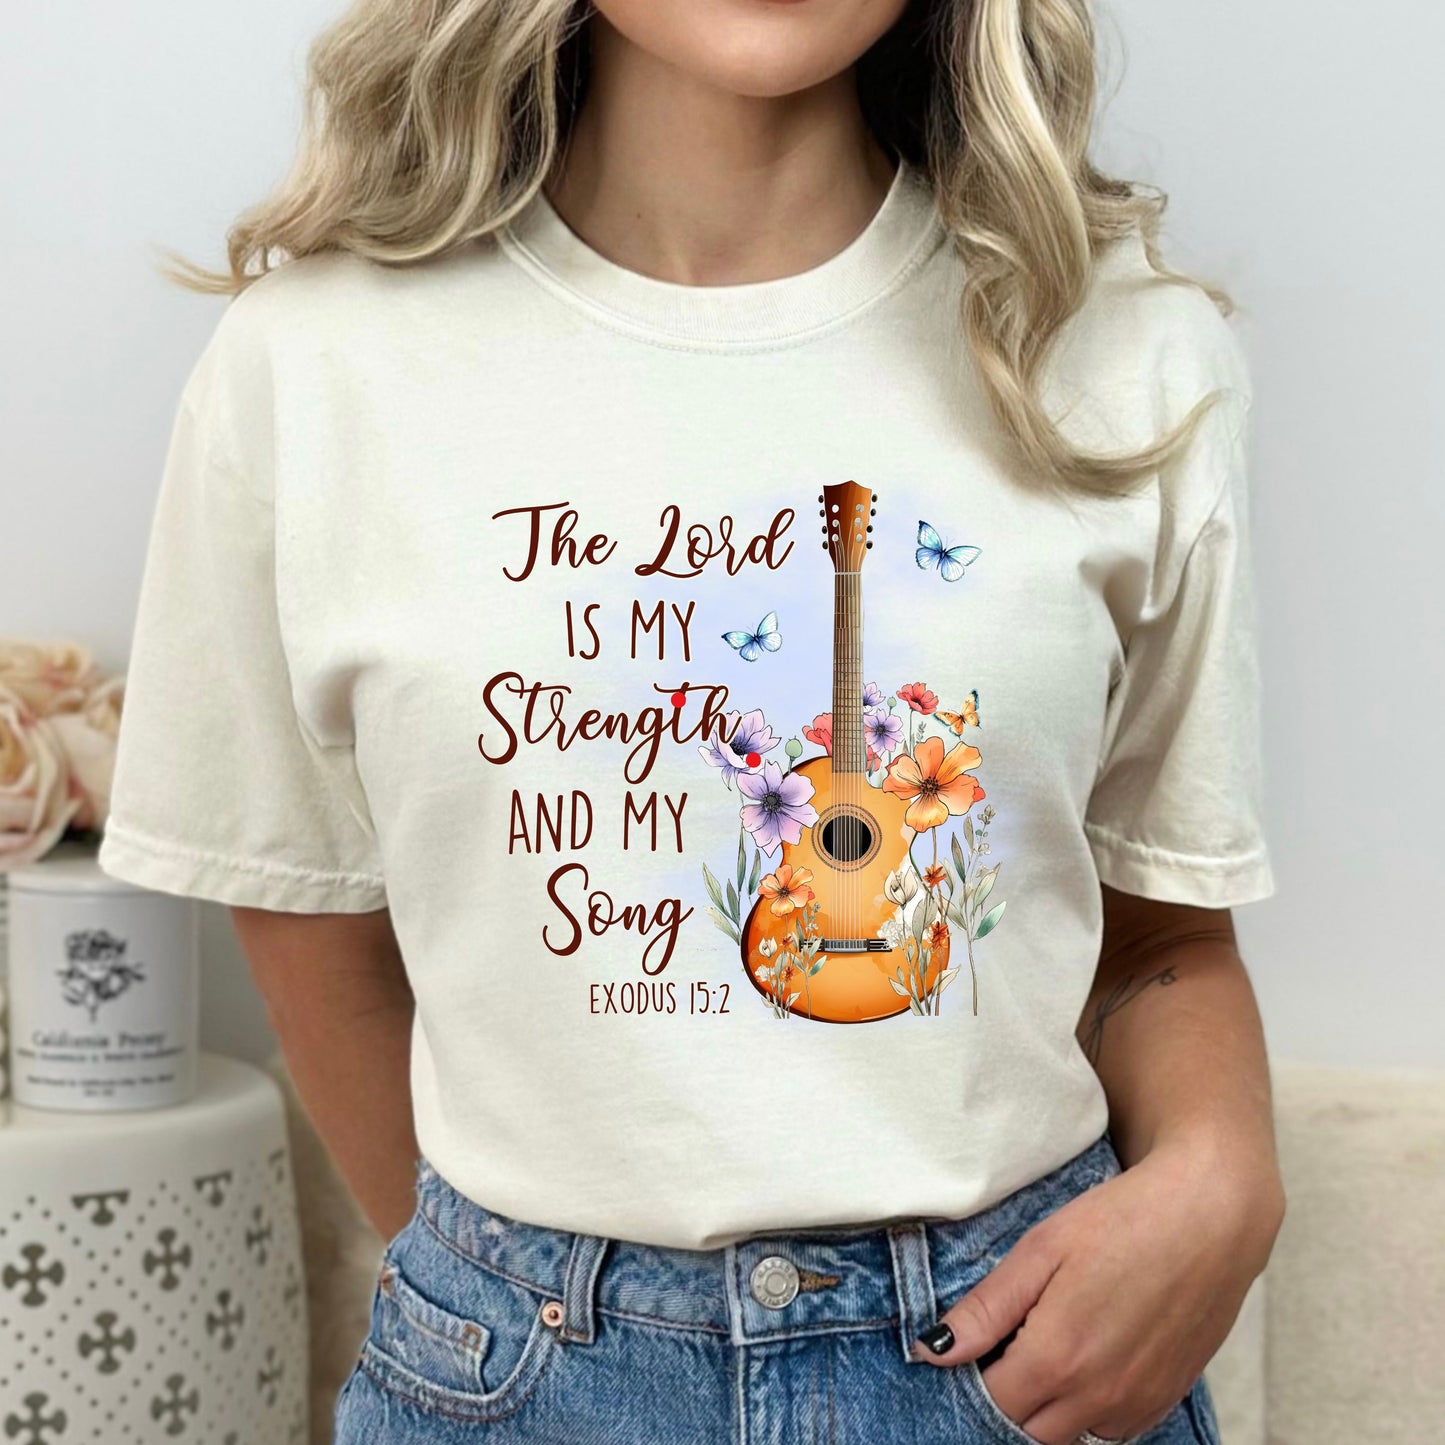 Lovely T-shirt with Bible Verse Message, The Lord is My Strength and Song, Guitar, Religious T-Shirt, Christian T-Shirt, Gifts for Her